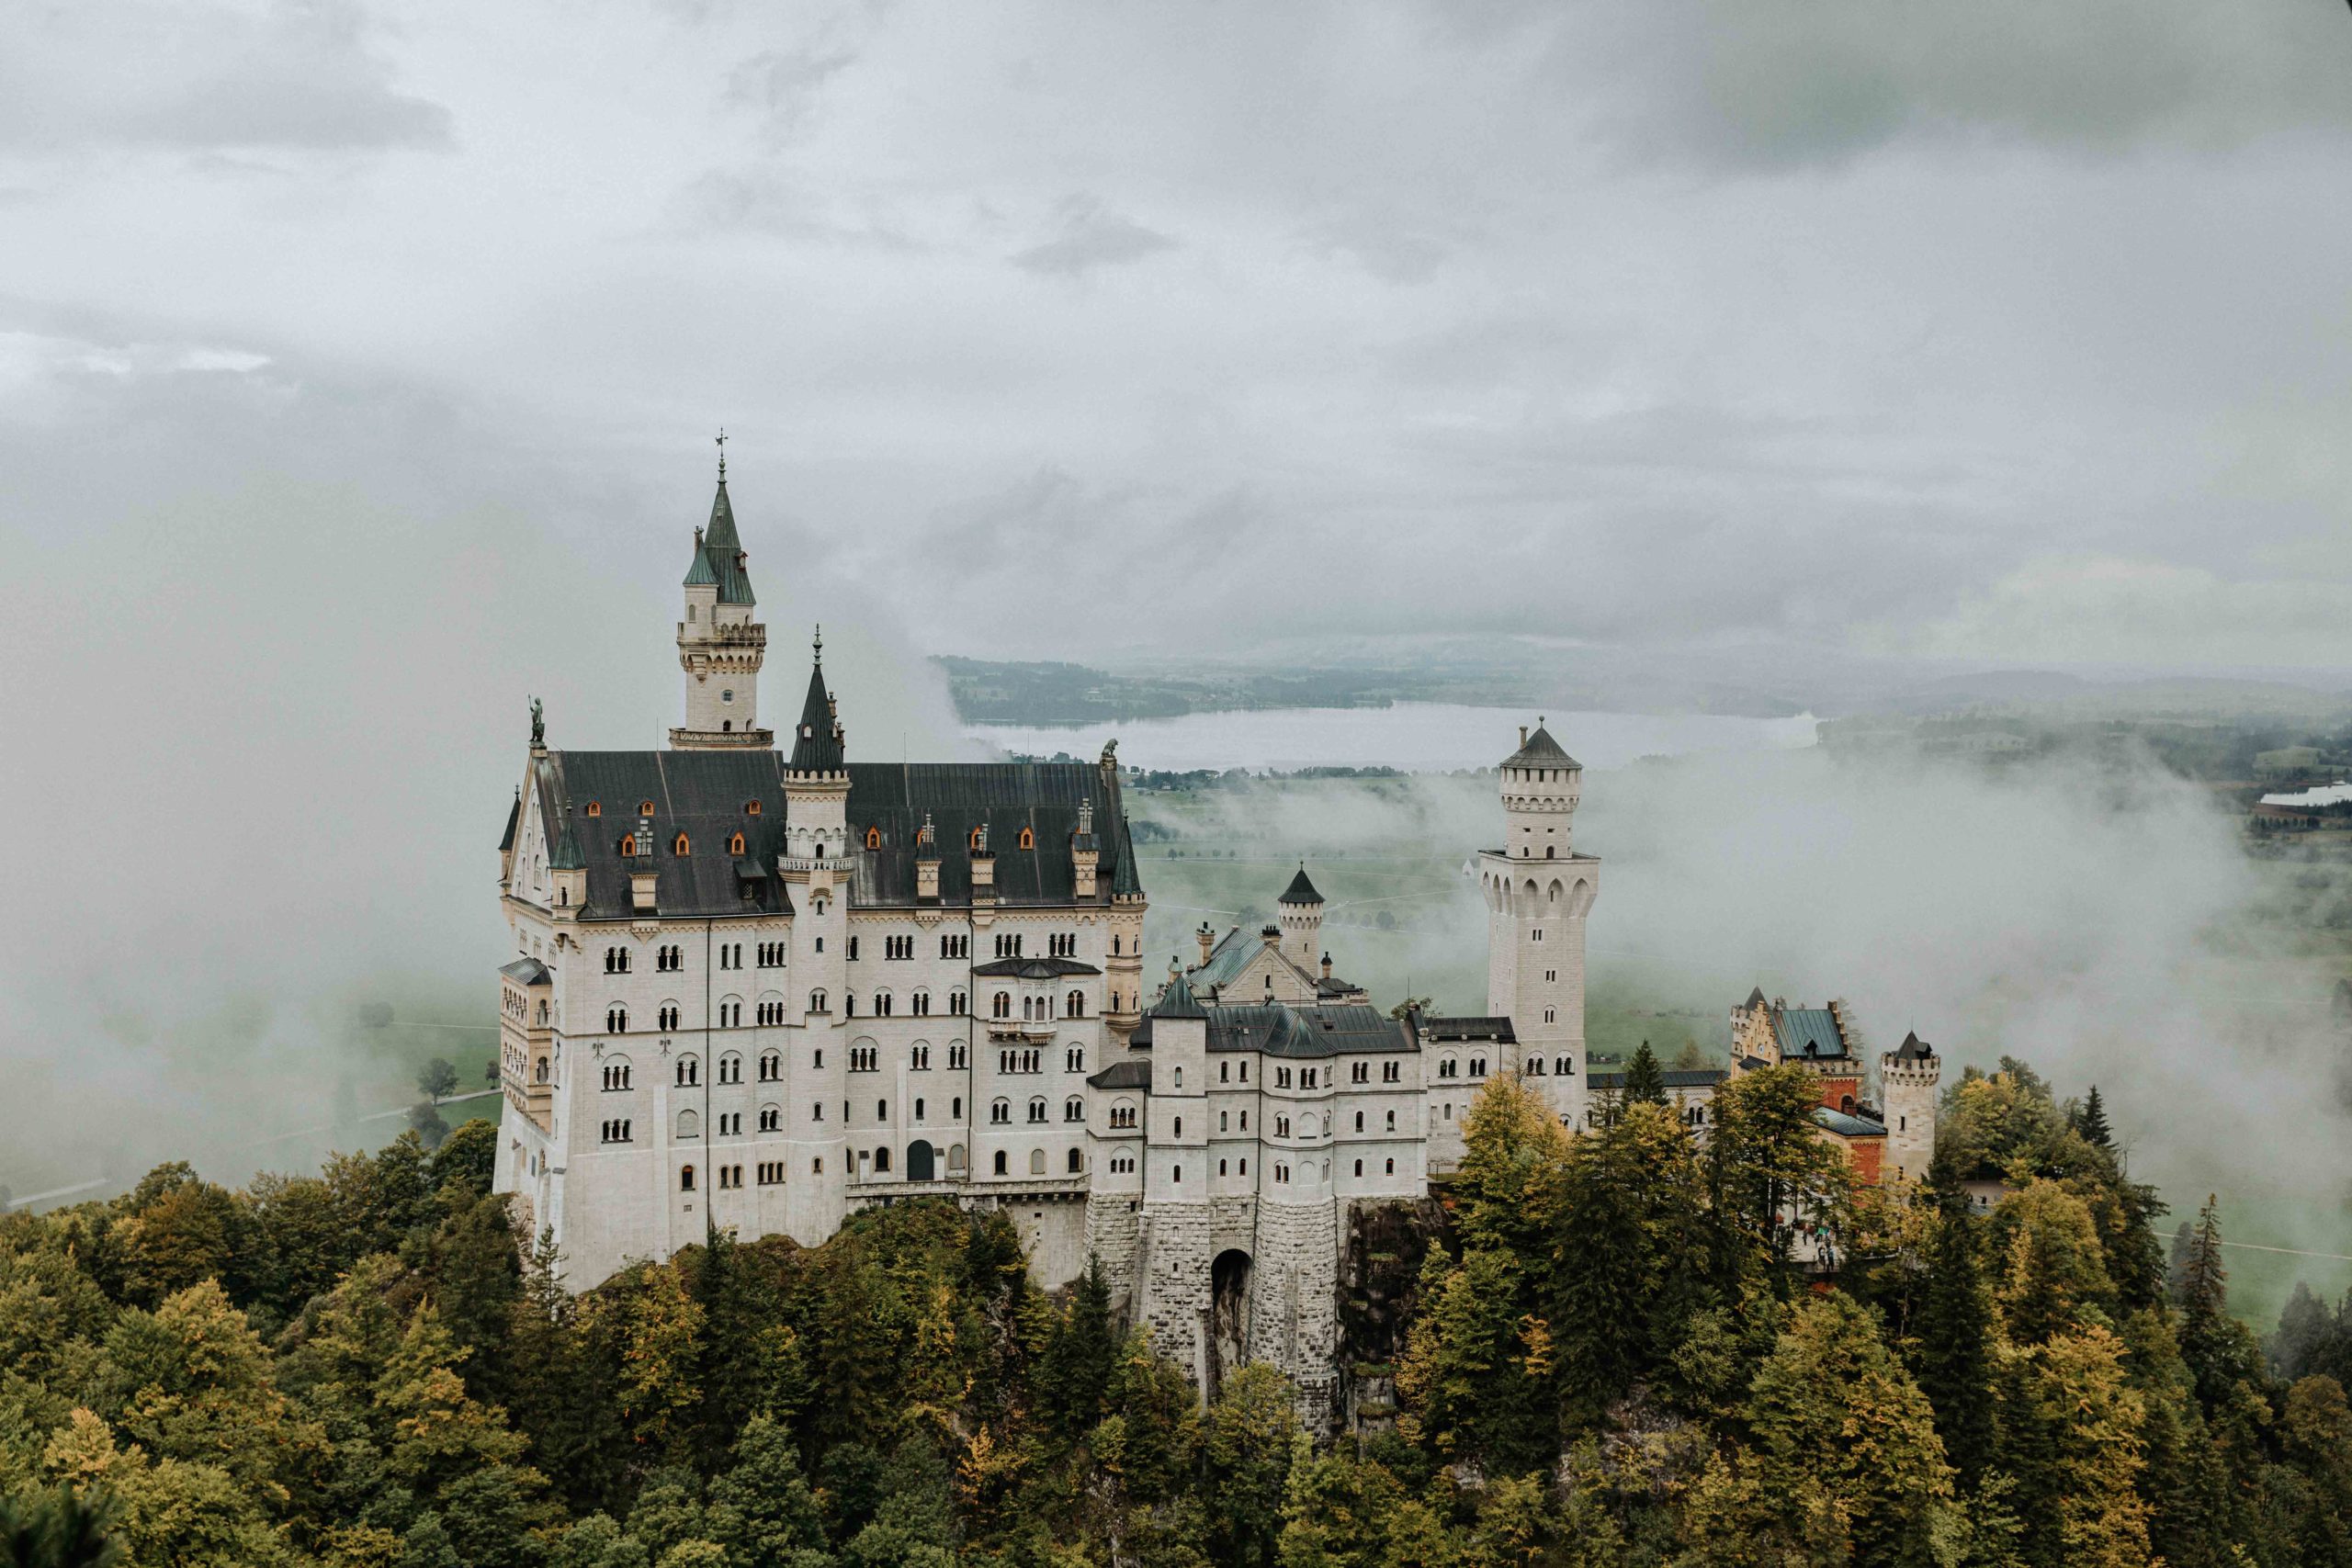 A great place to elope in Germany is Schloss Neuschwanstein. This photo of the castle is from the side with the area of Füssen in the background. The castle is surrounded by mist and the leaves are changing color for fall.